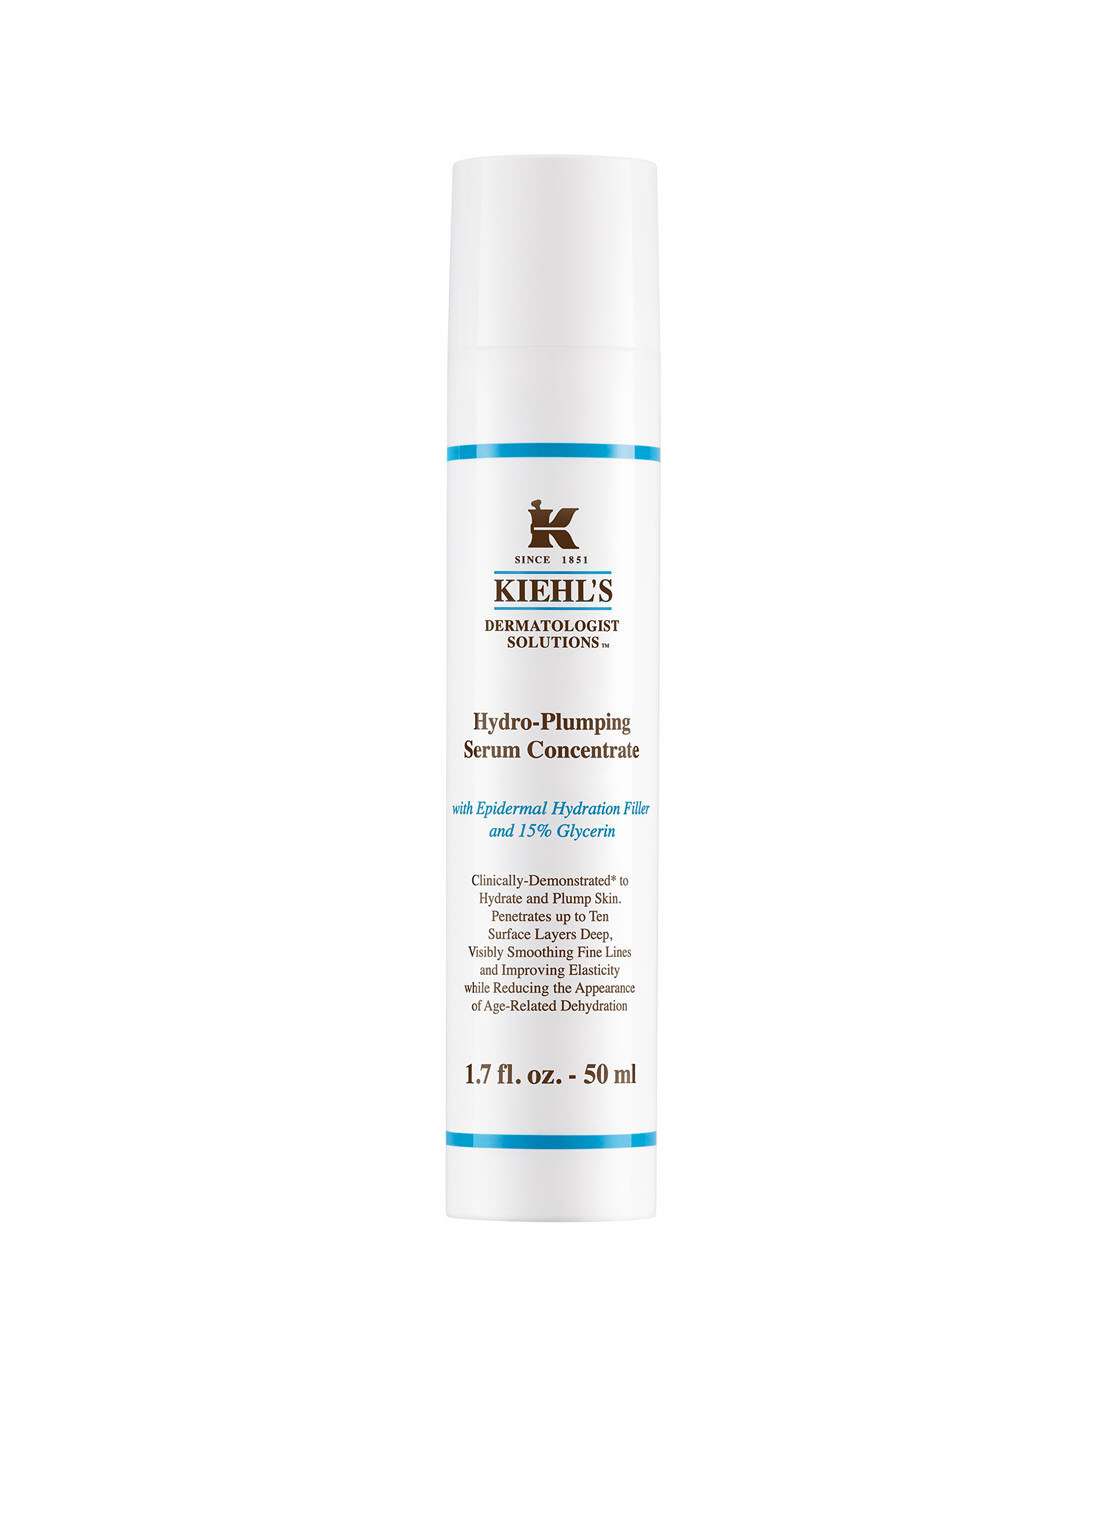 Kiehl's Hydro-Plumping Serum Concentrate - serum